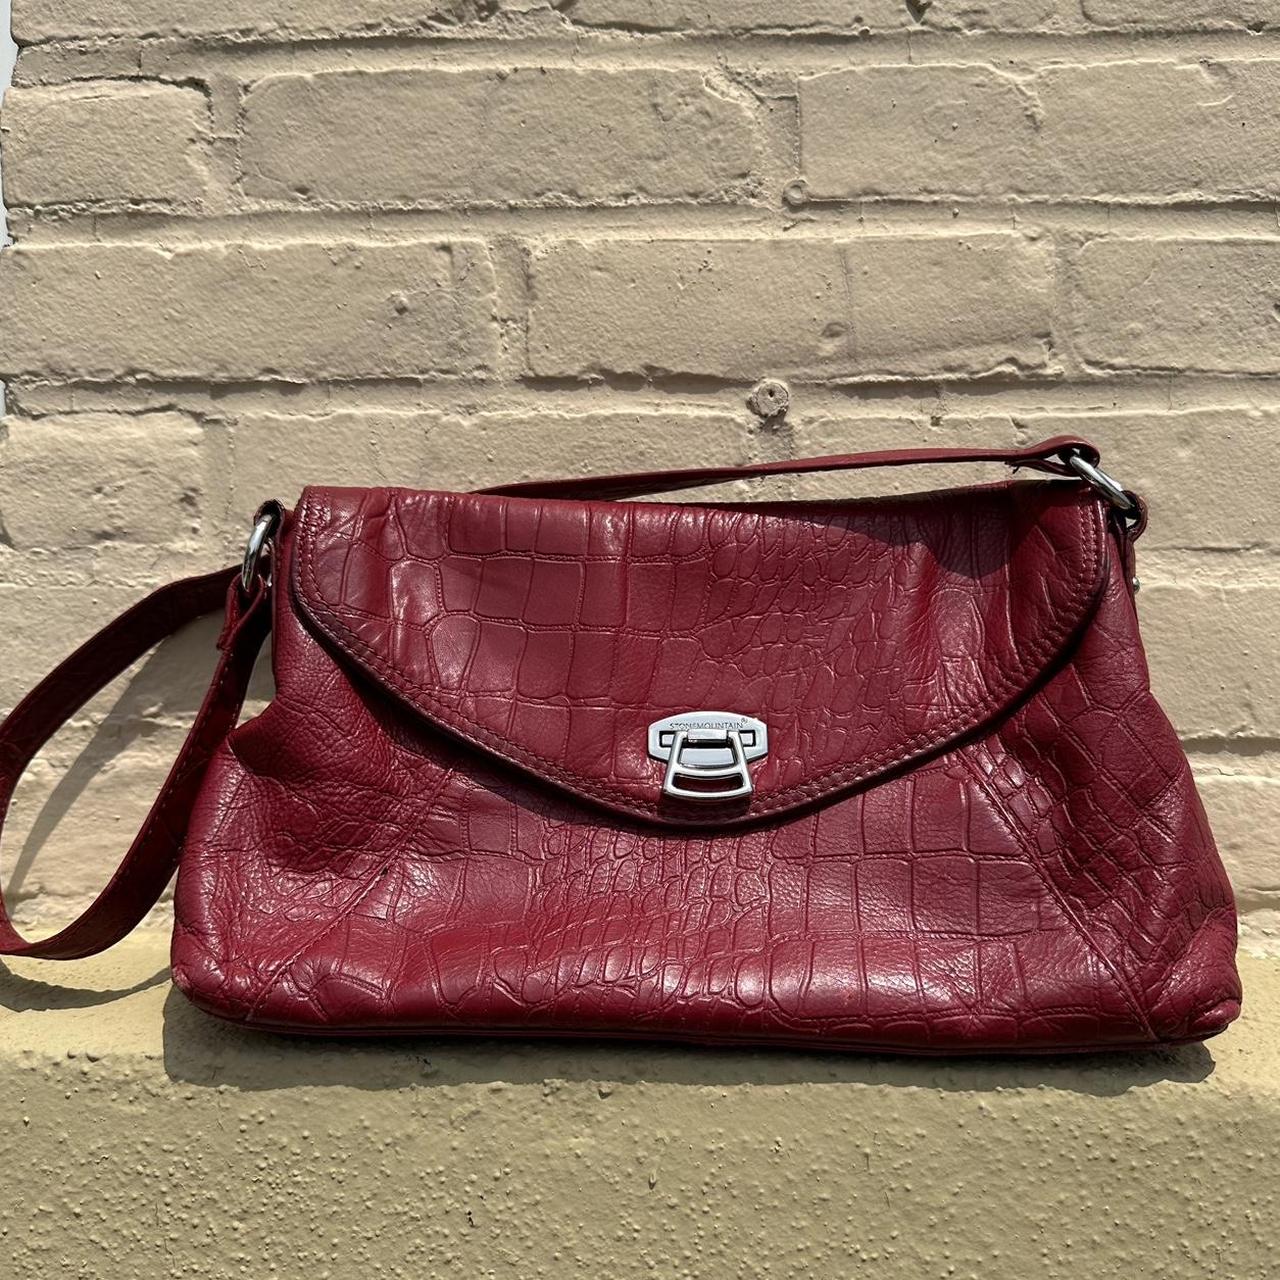 Stone Mountain Red Shoulder Bags